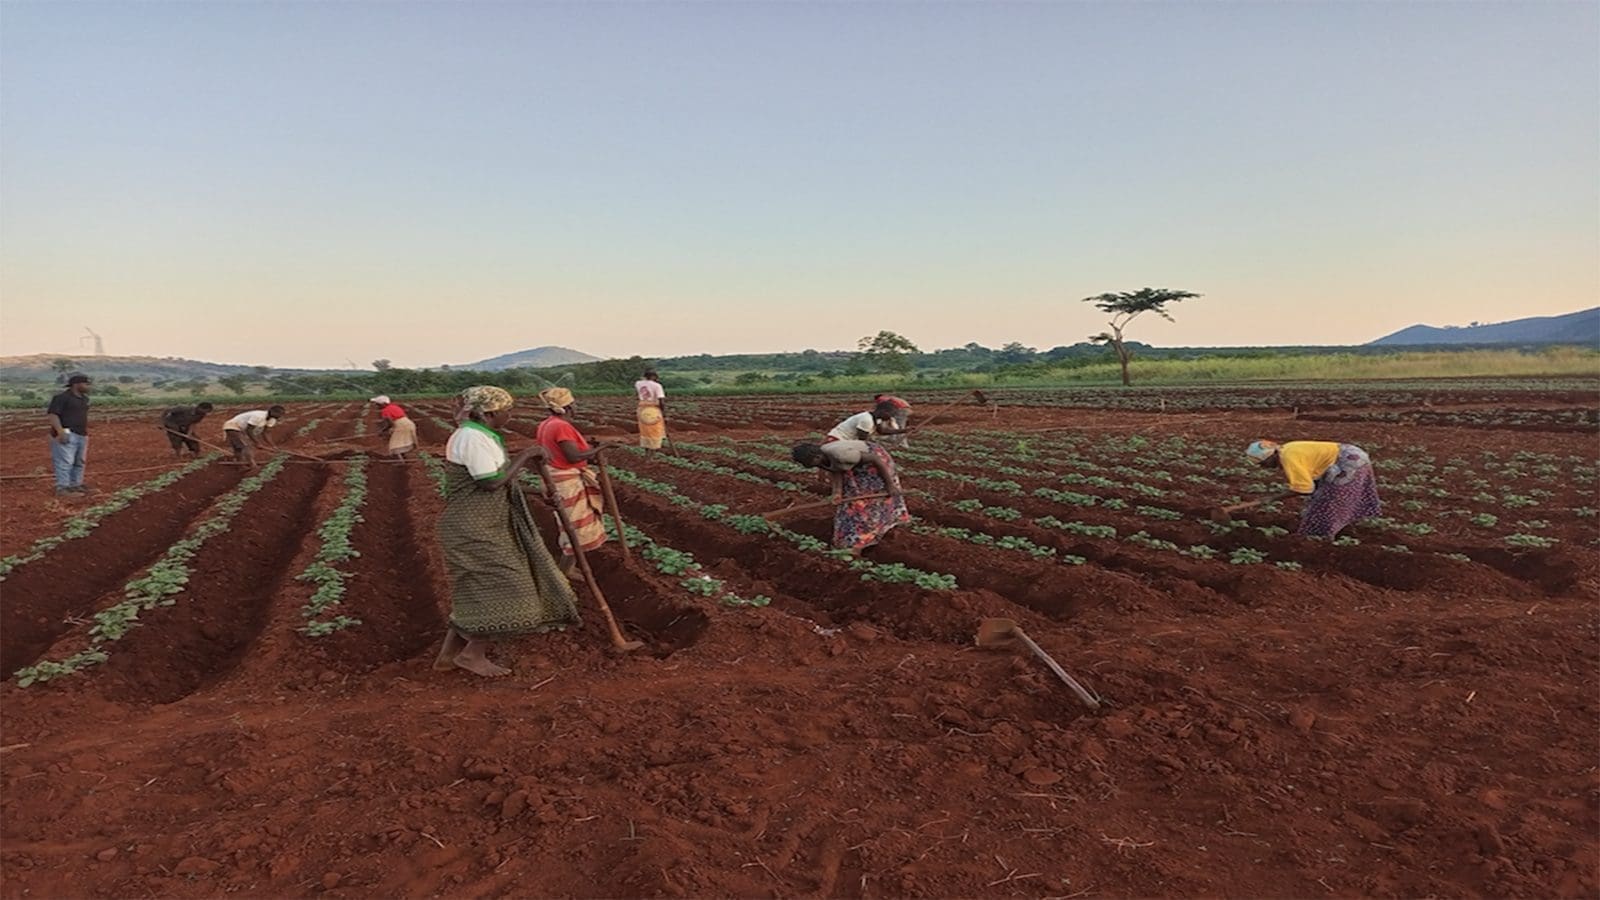 Solidaridad, Wageningen University partner to train potato farmers on good agricultural practices